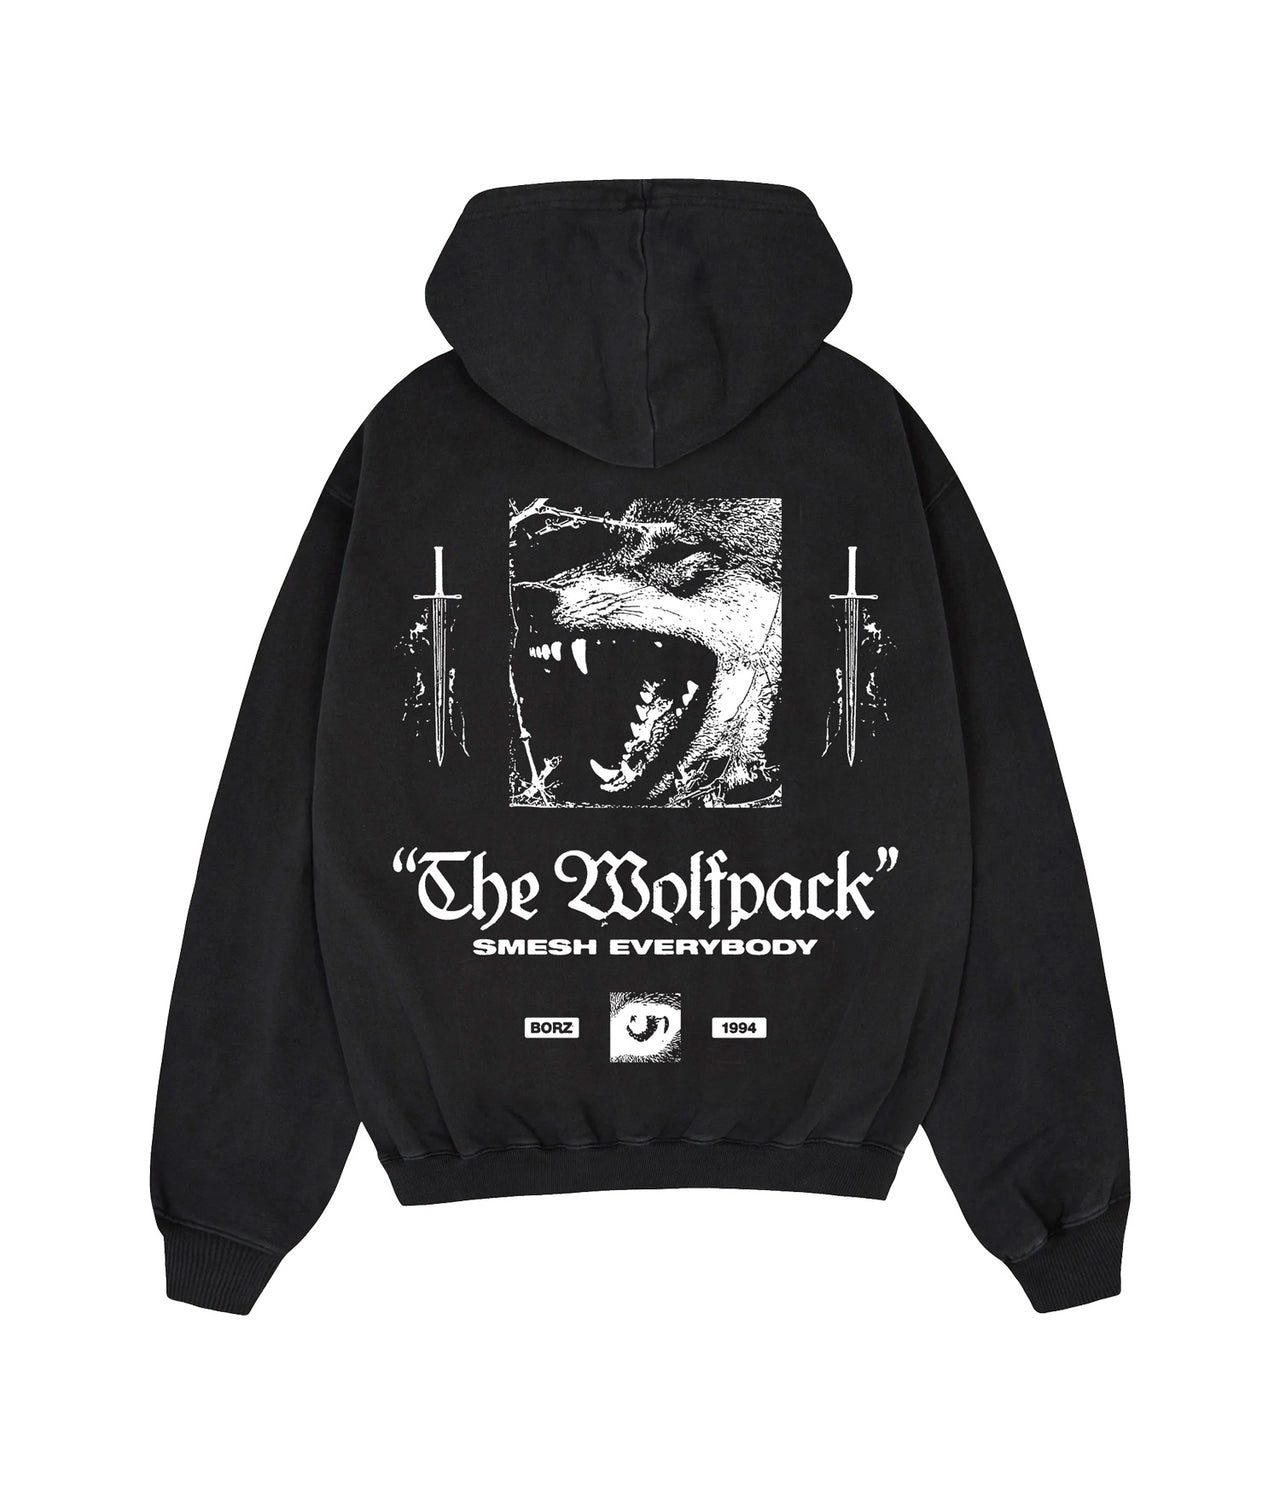 Attack Hoodie